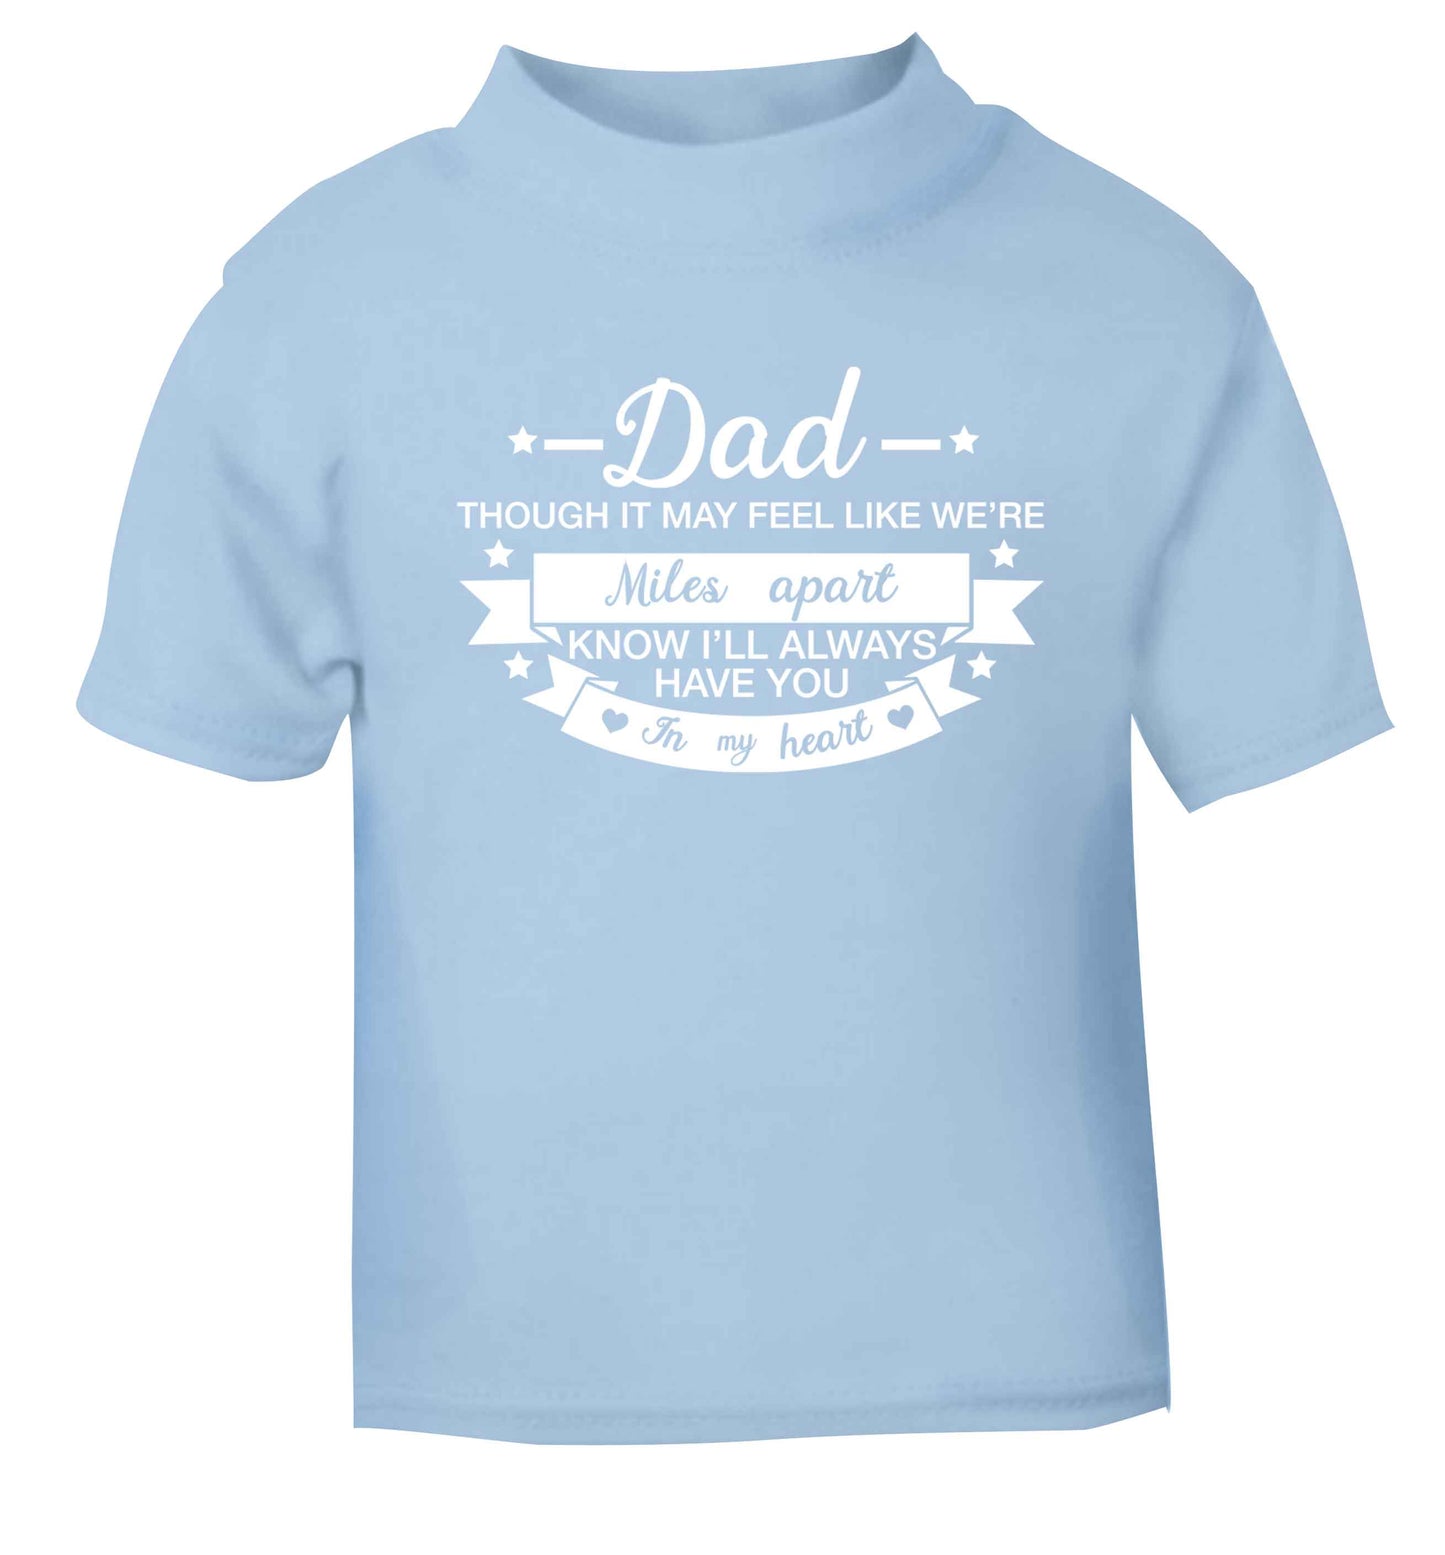 Dad though it may feel like we're miles apart know I'll always have you in my heart light blue baby toddler Tshirt 2 Years